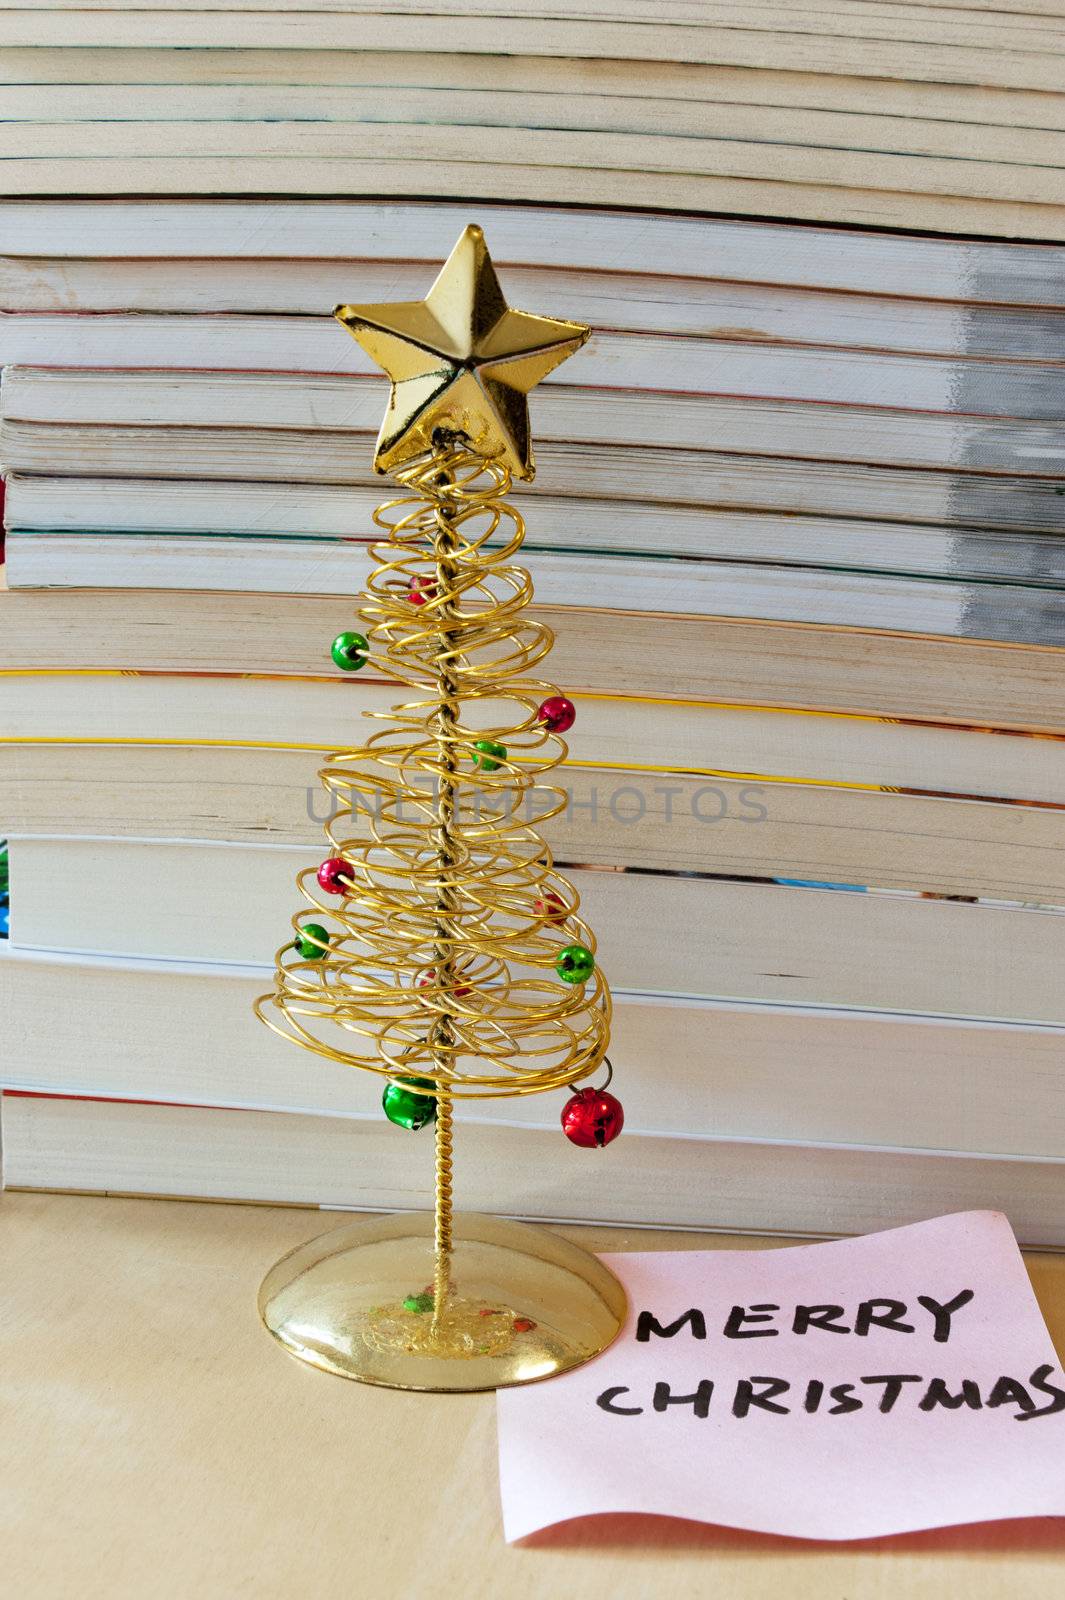 Merry Christmas memo under the Christmas tree with books as background